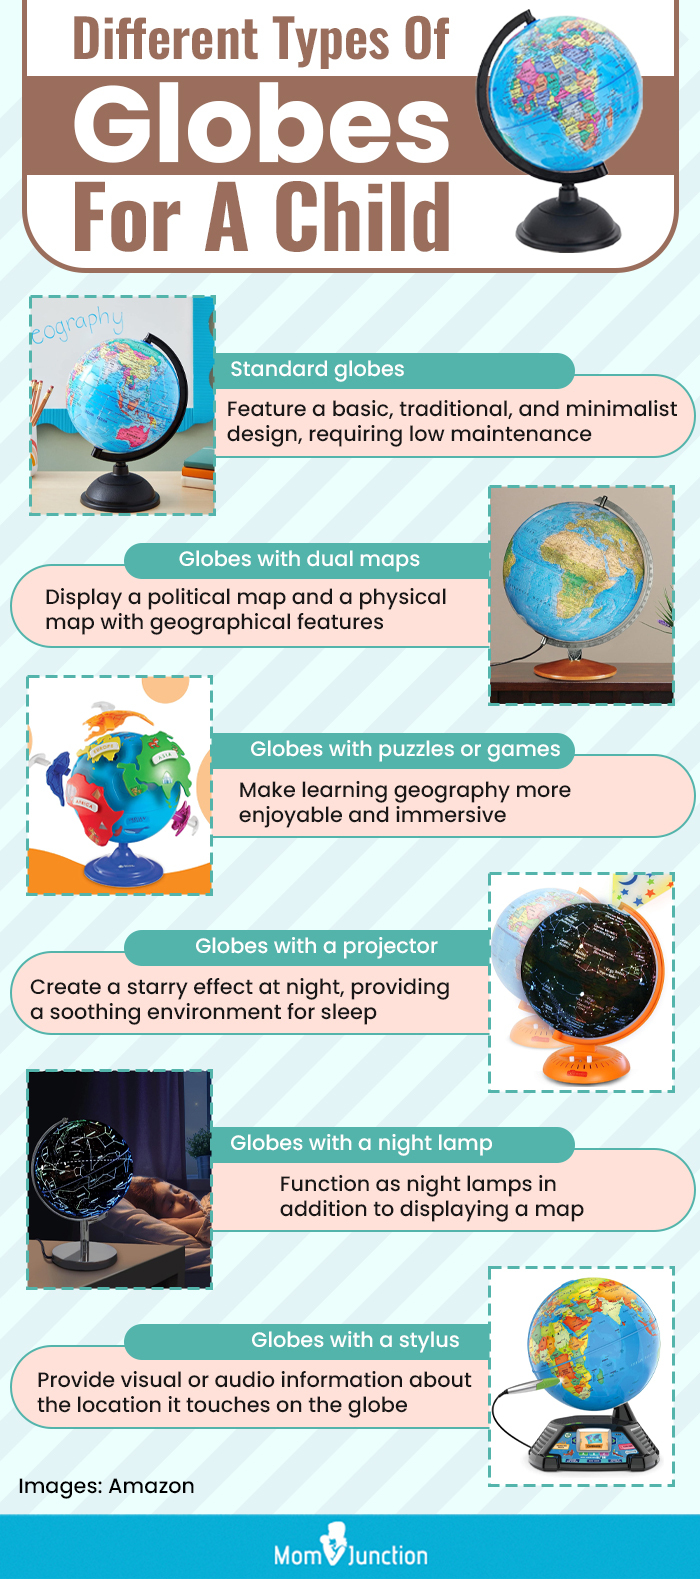 Different Types Of Globes For A Child (infographic)